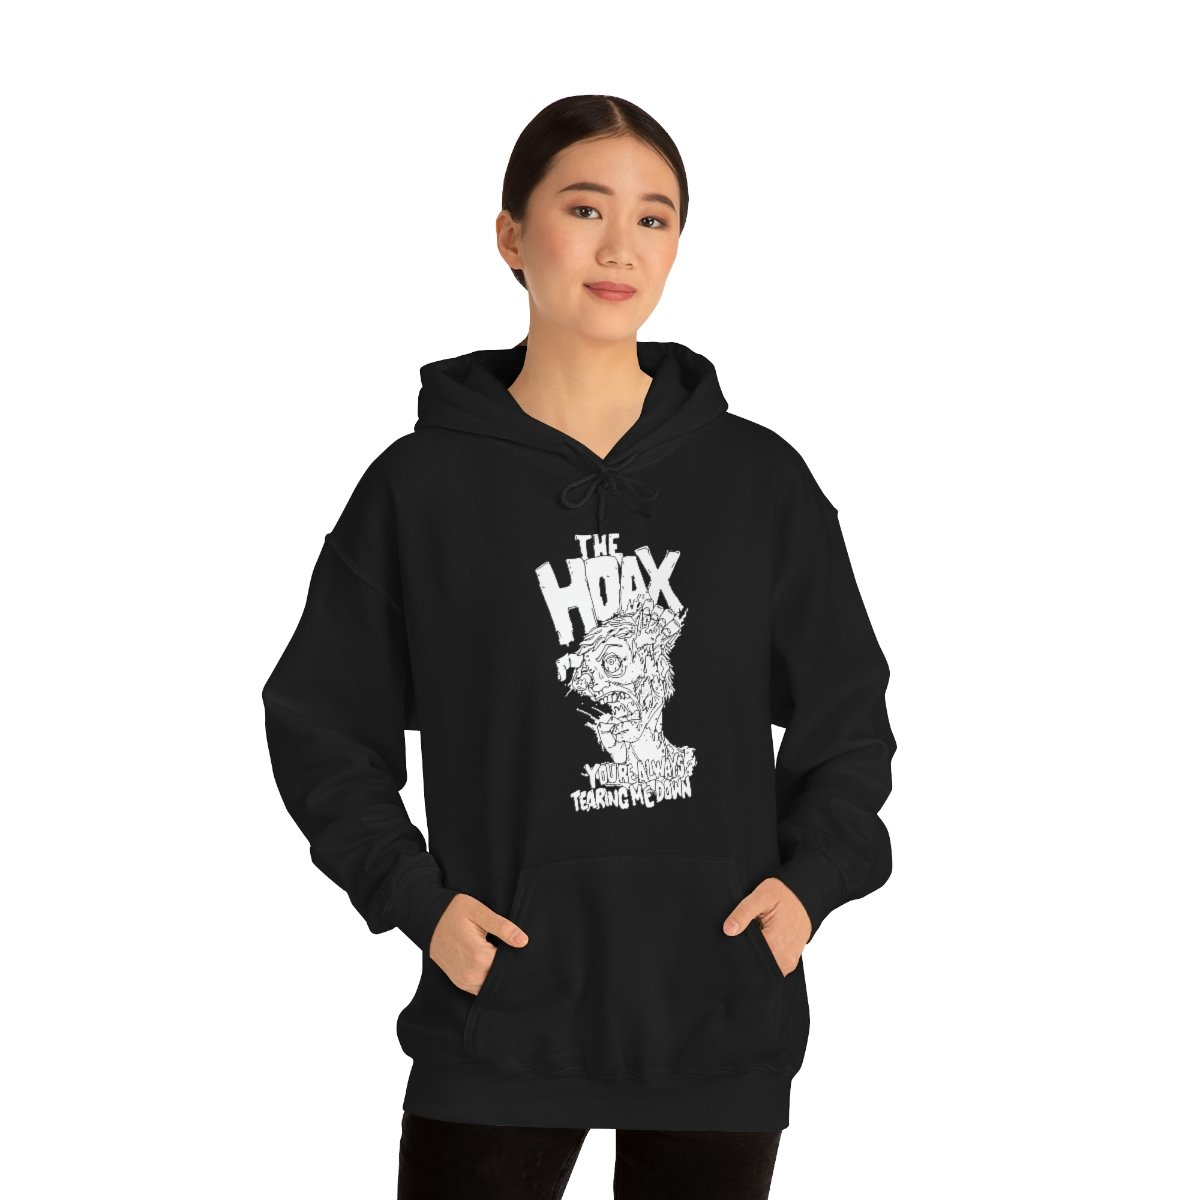 The Hoax – Tearing Me Down (TPR) Pullover Hooded Sweatshirt